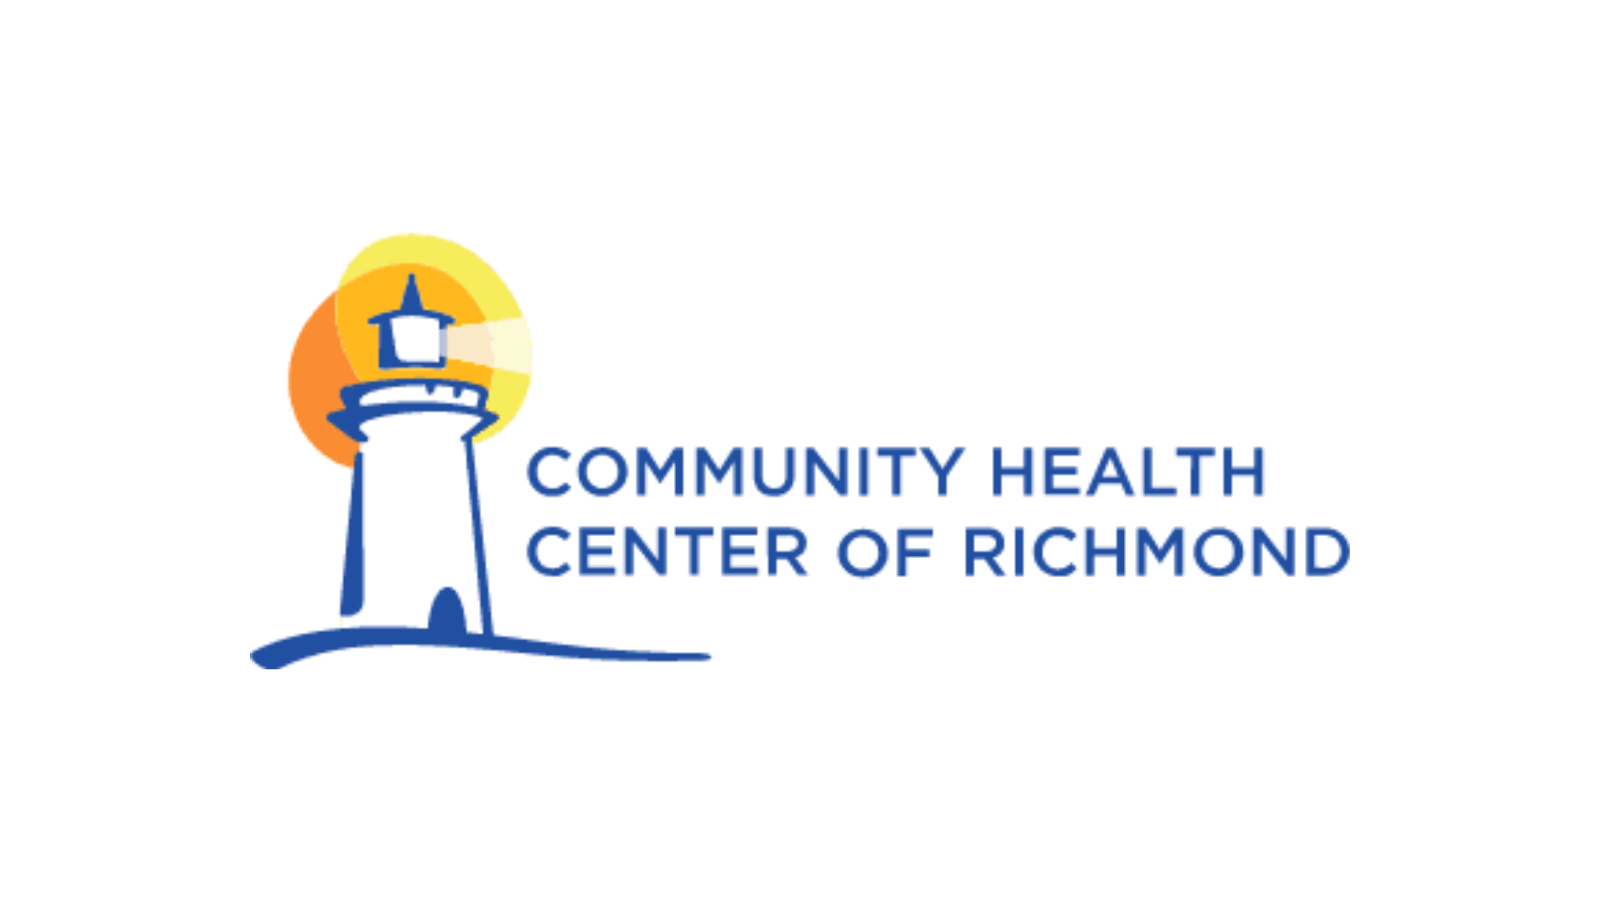 Community Health Center of Richmond Received a $500,000 Grant from Empire BlueCross BlueShield Foundation to Advance Maternal Health Outcomes